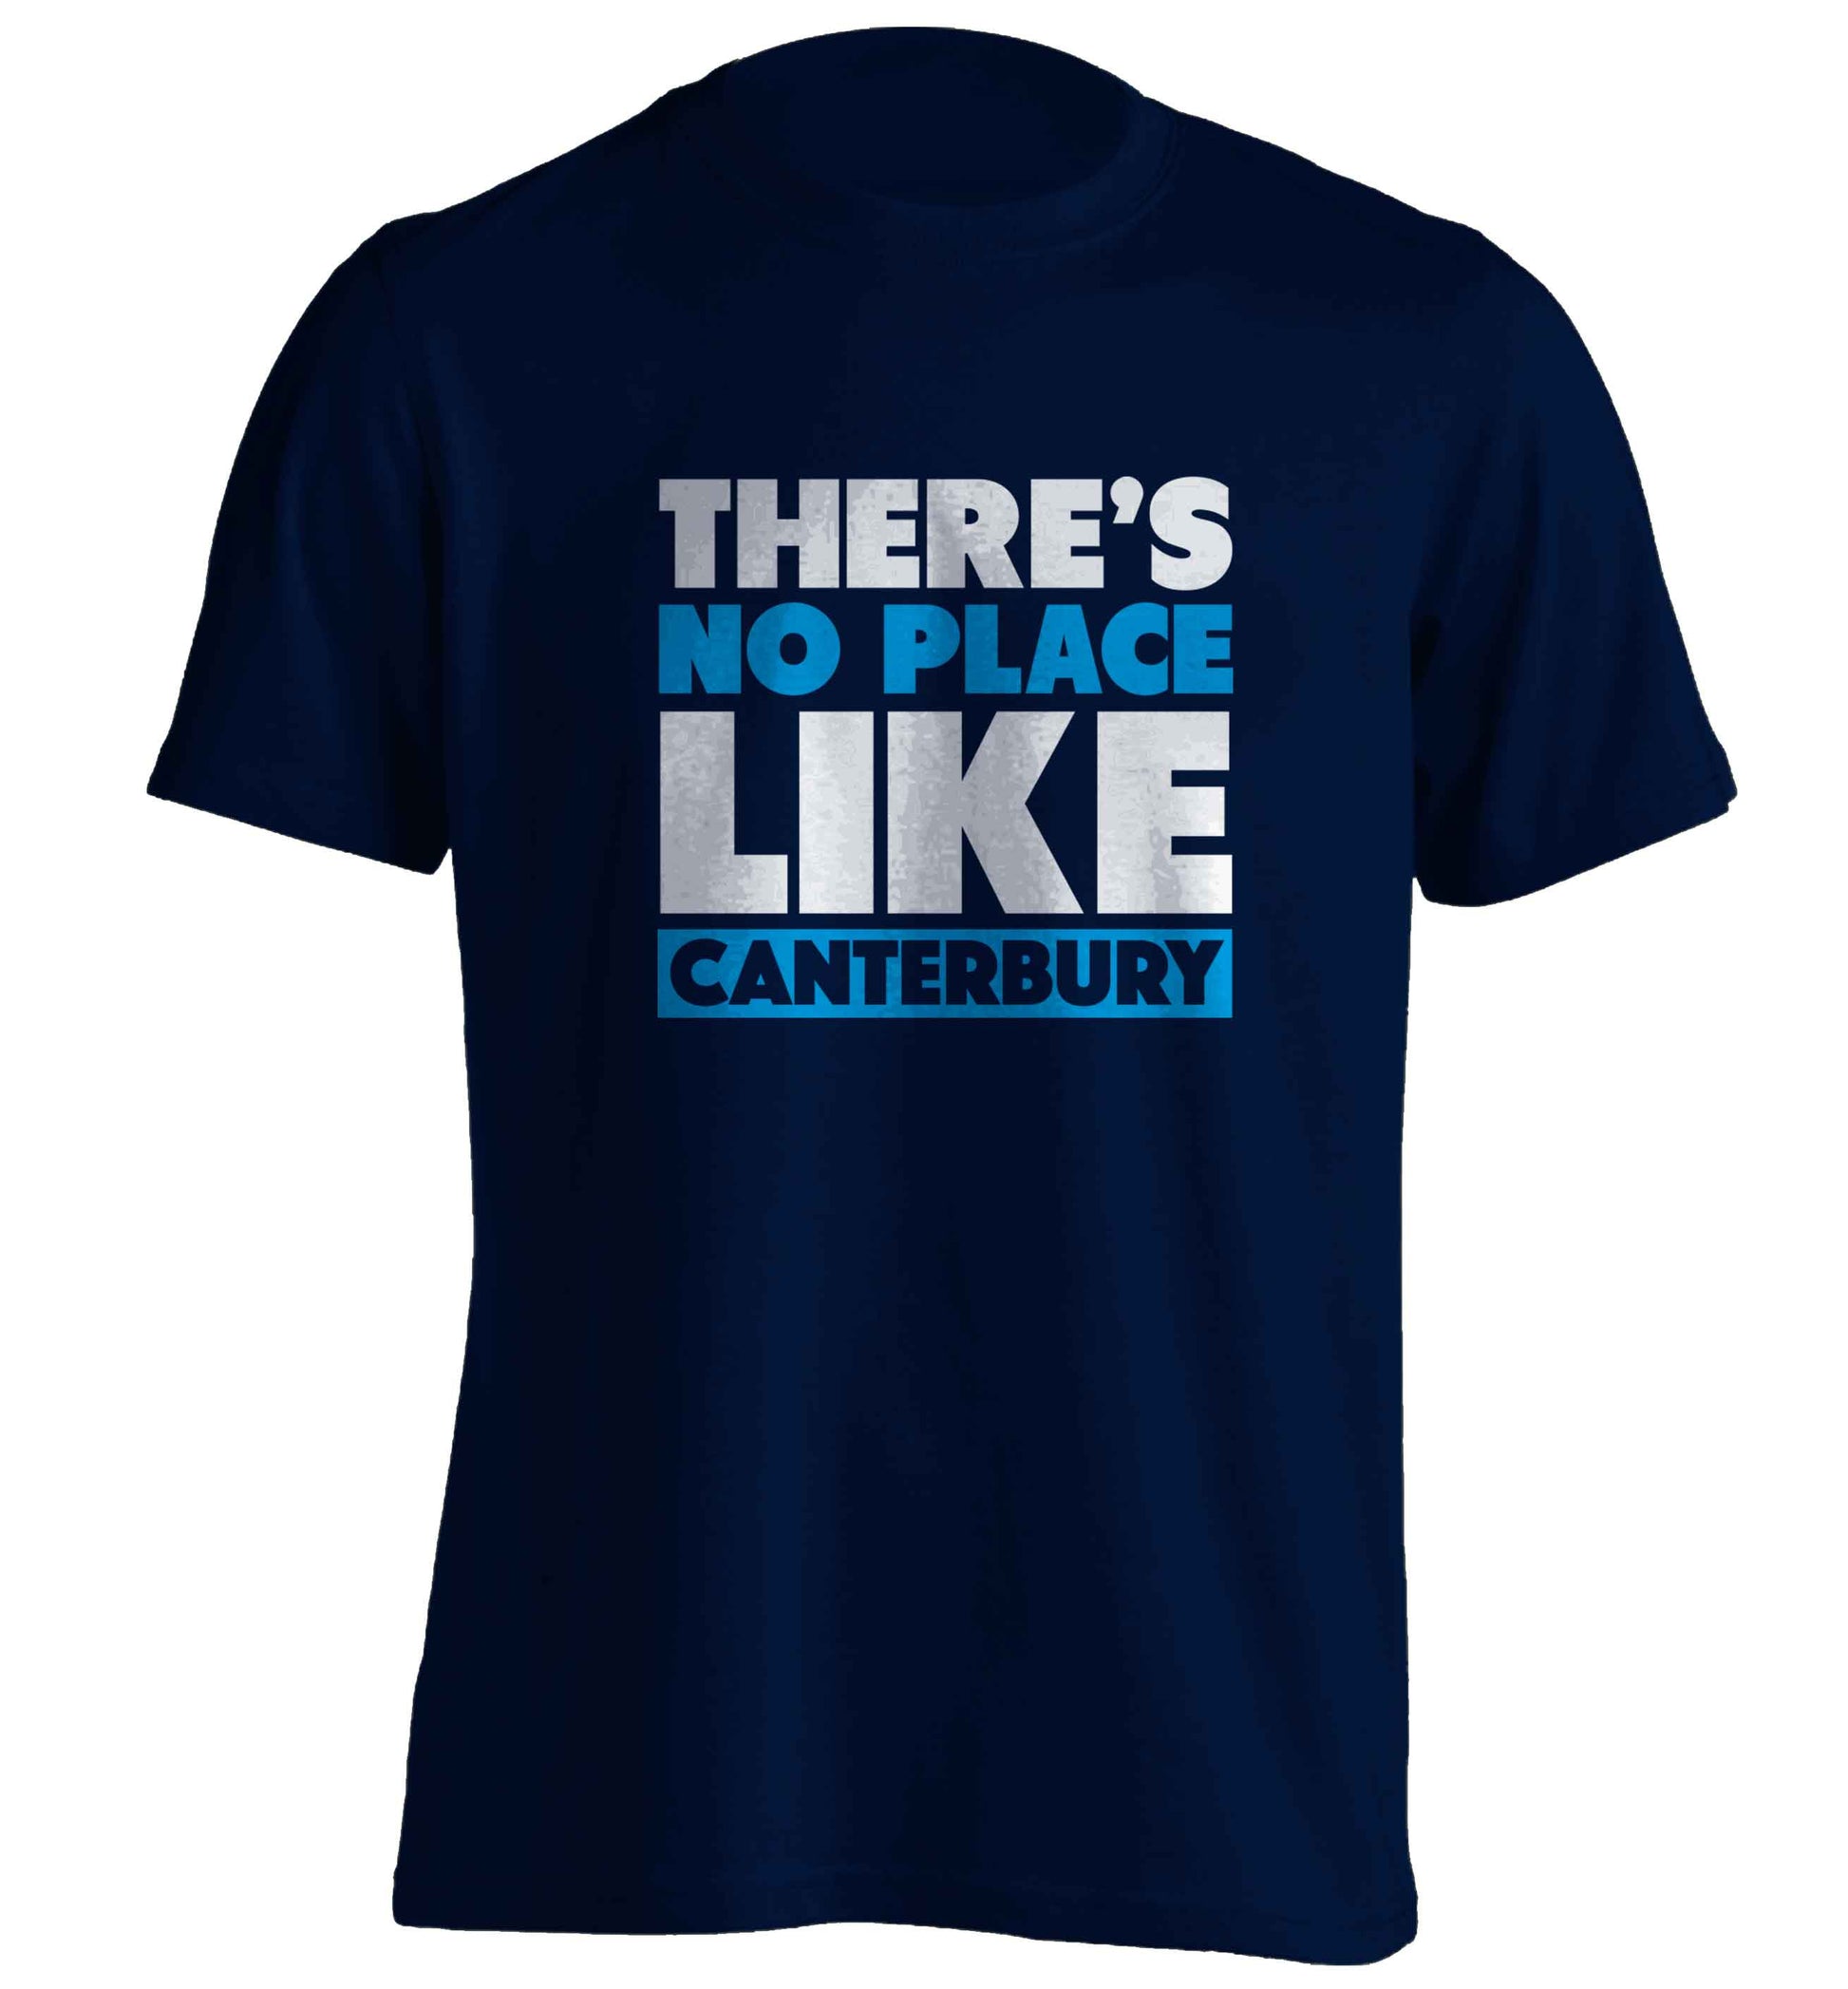 There's no place like Canterbury adults unisex navy Tshirt 2XL